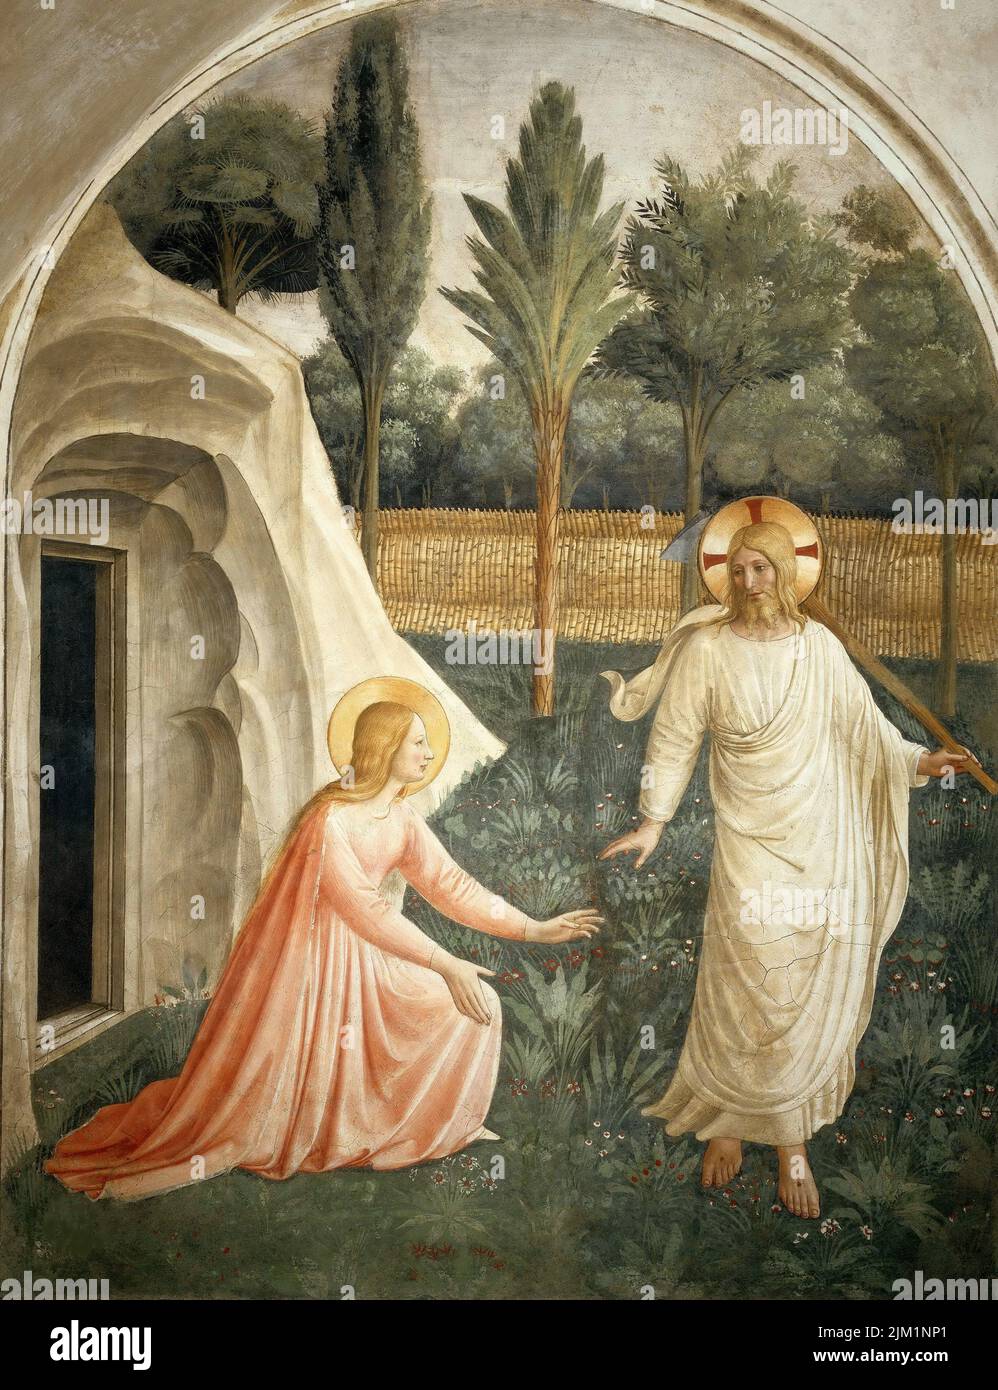 Noli me tangere. Museum: San Marco, Florence. Author: FRA ANGELICO. Stock Photo